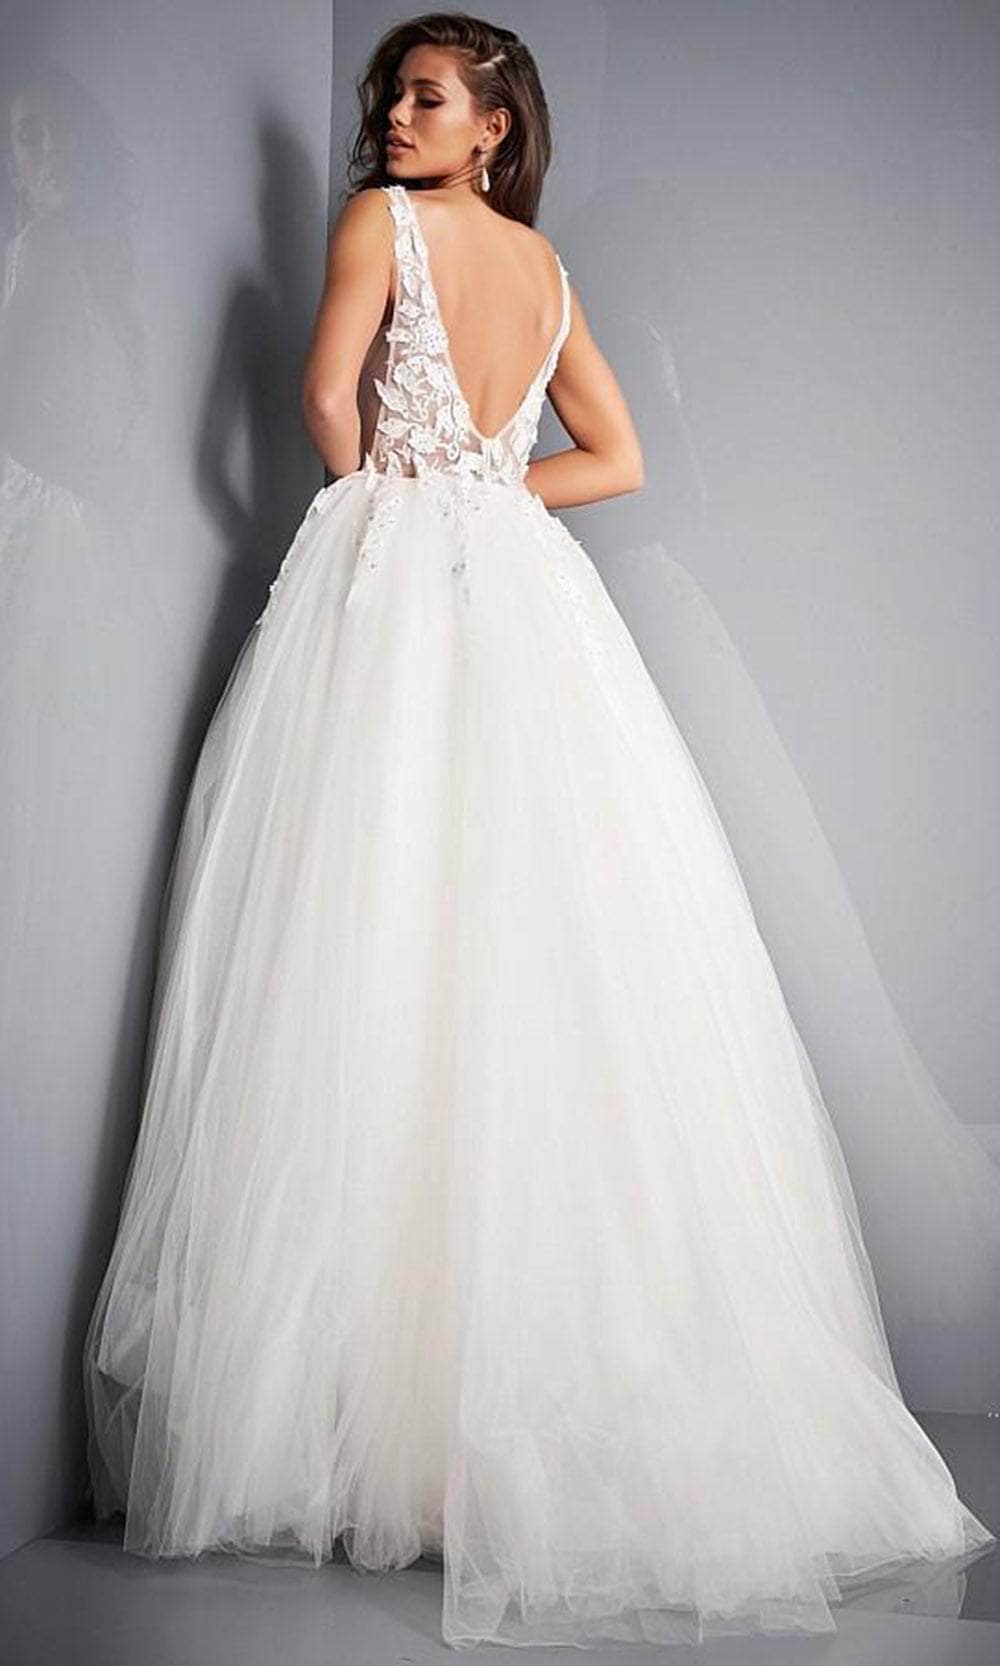 Jovani - 02840 Plunging Neck Floral Applique Tulle Ballgown Ball Gowns